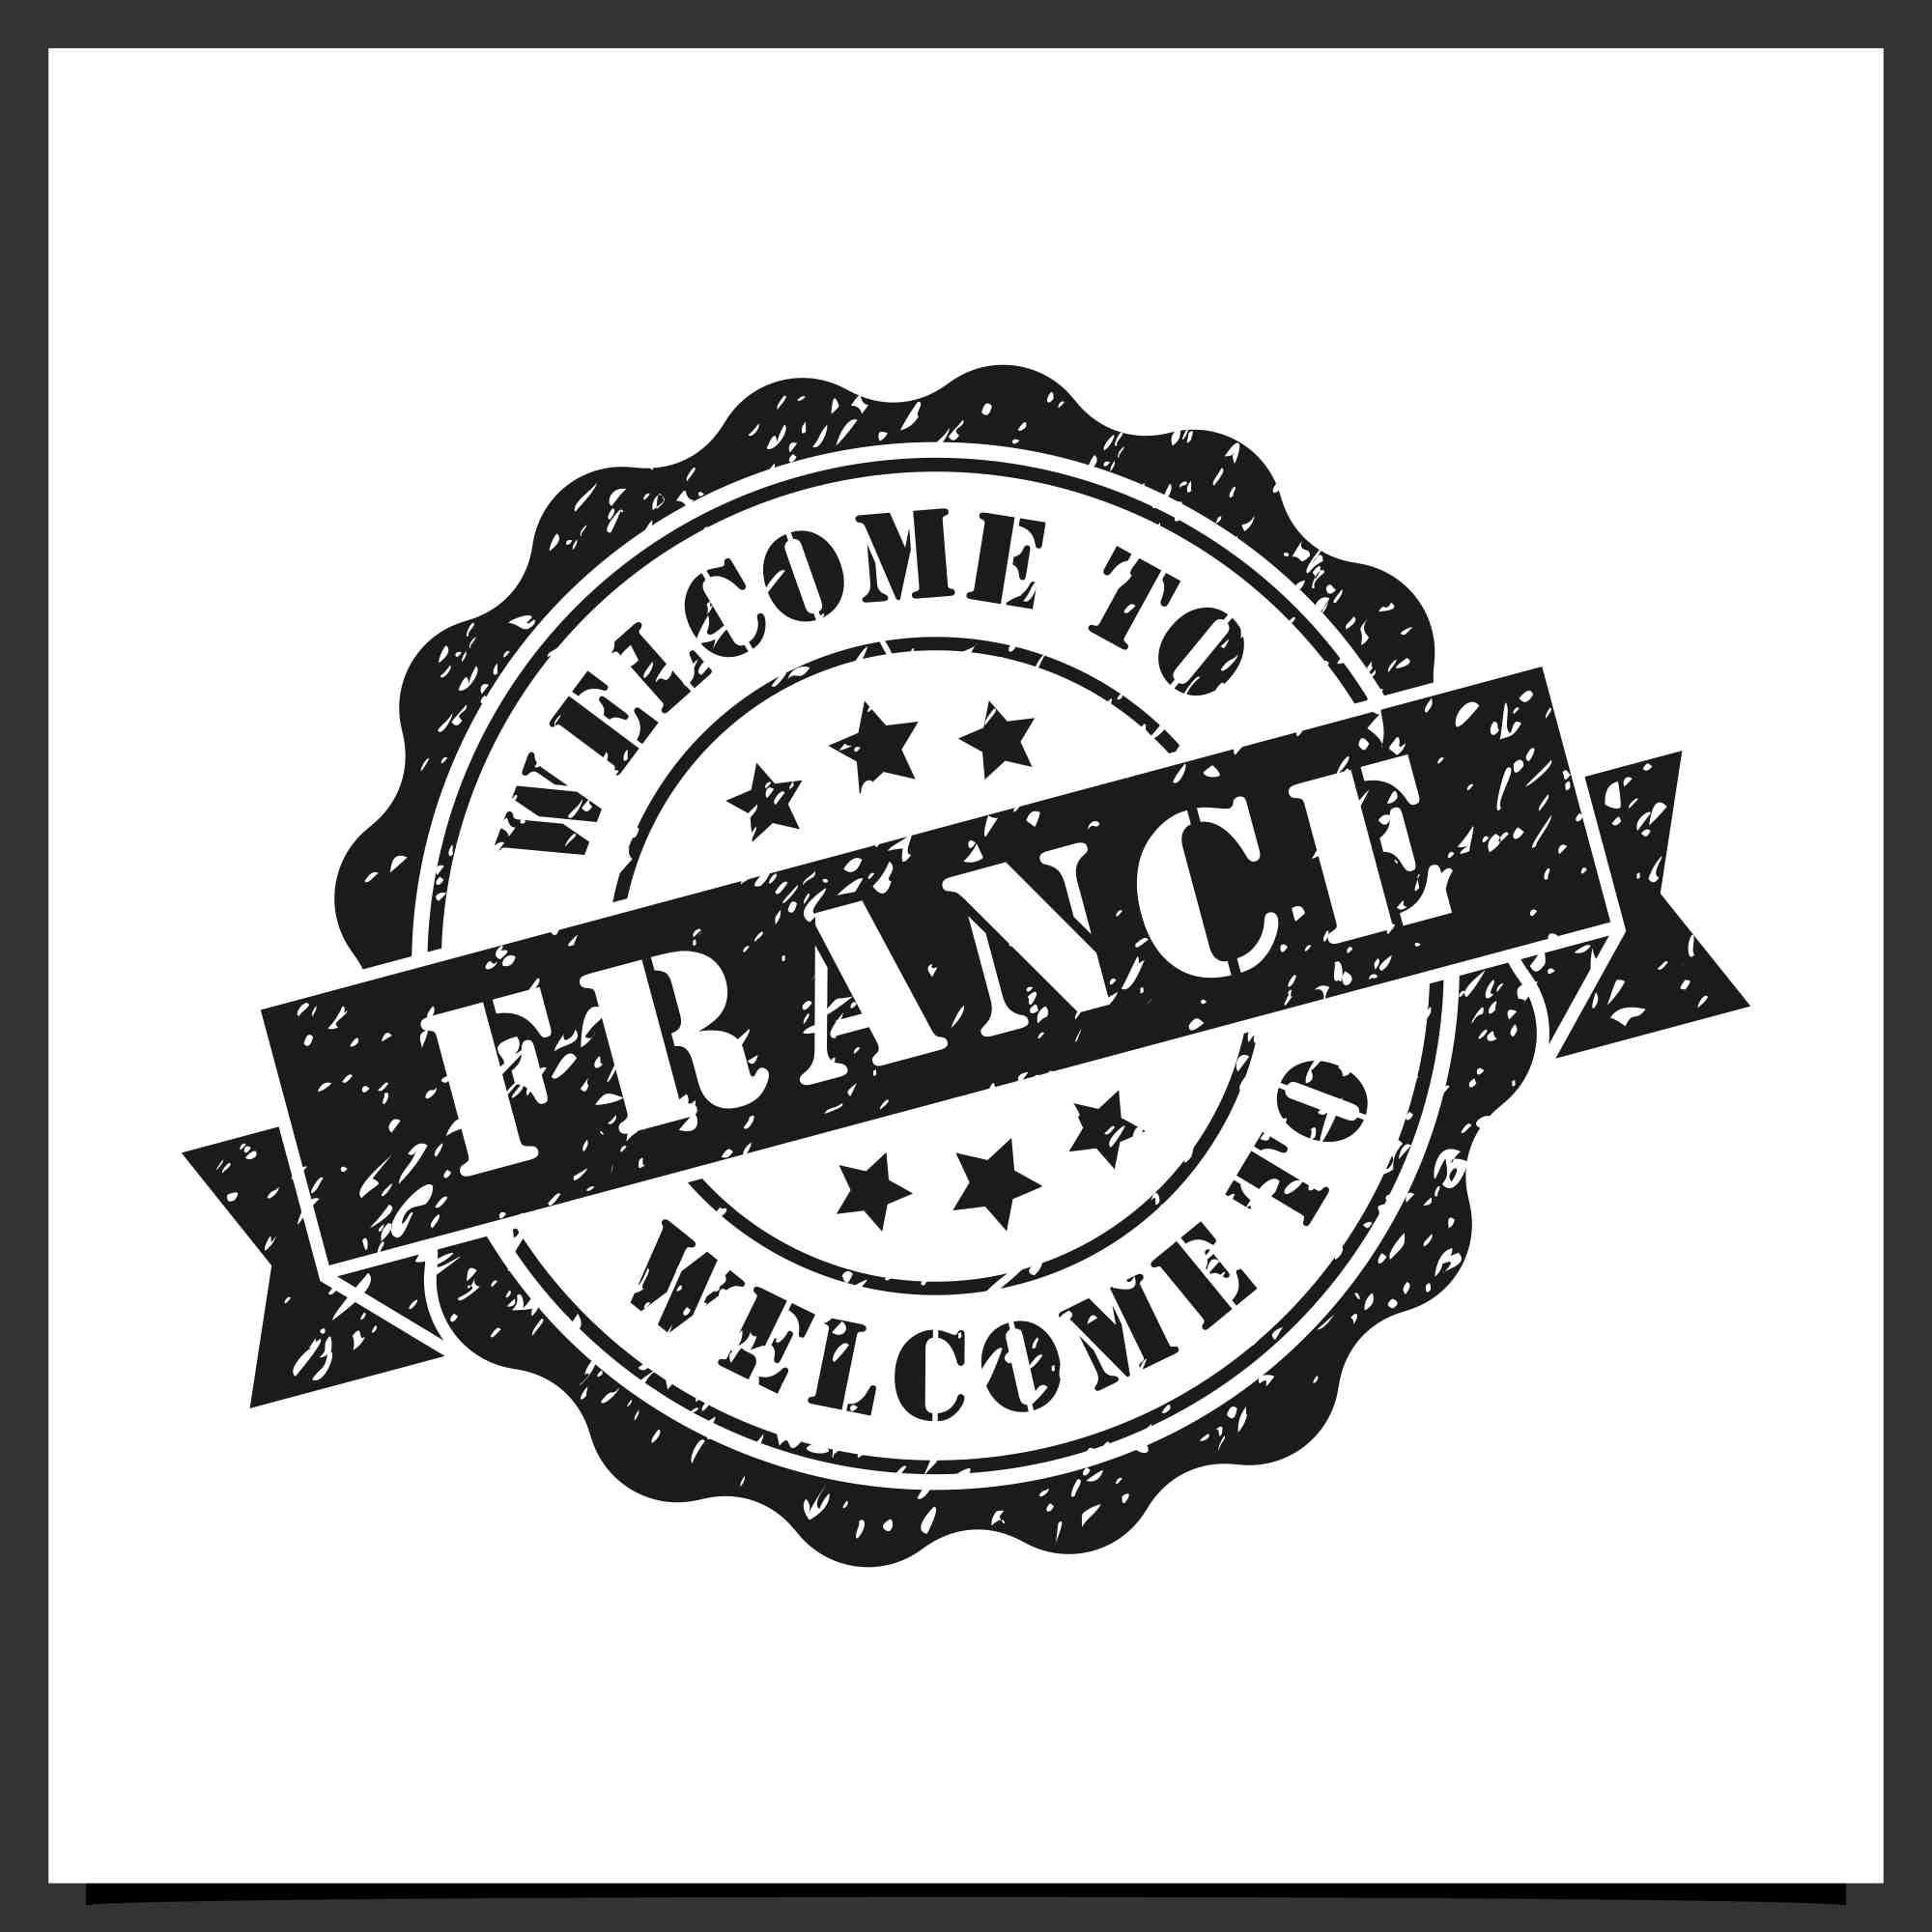 welcome to paris france vector stamps logo collection - $4 preview image.